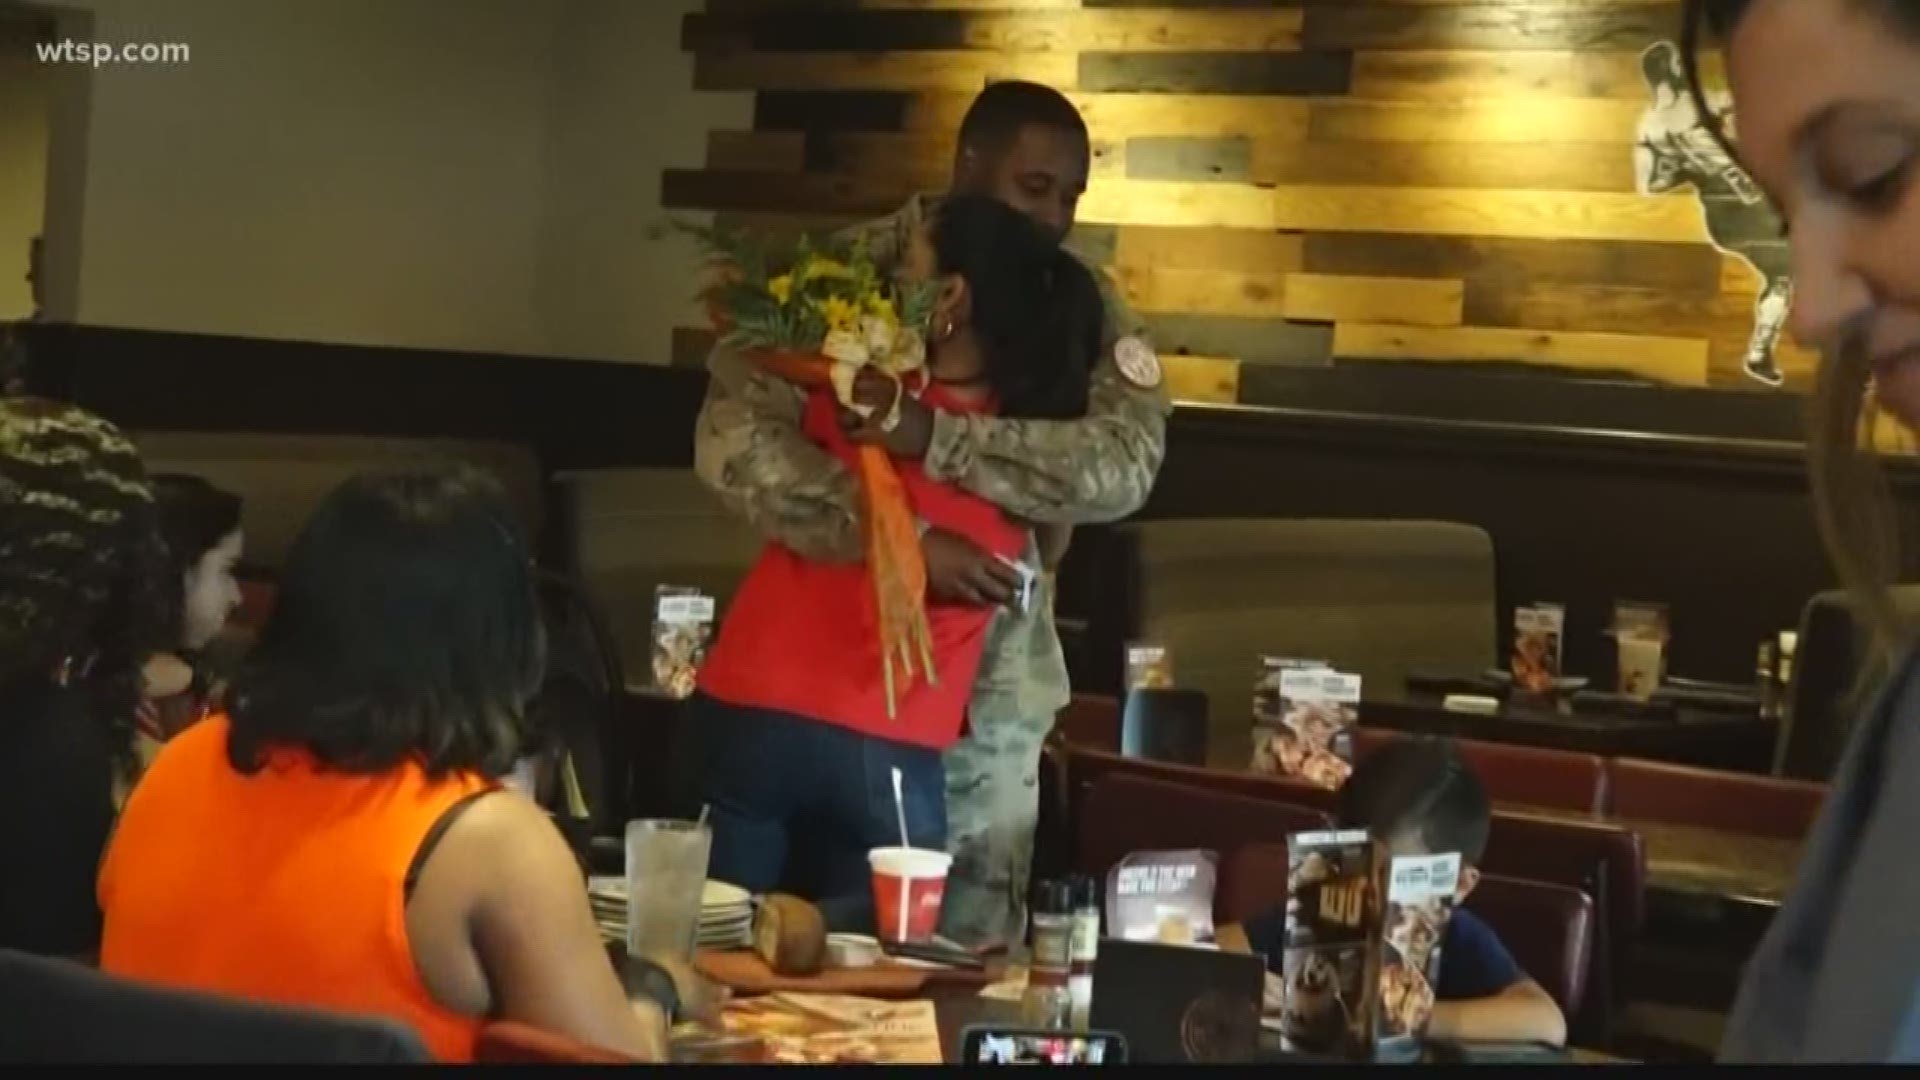 The last thing Tania Terry expected was to see her husband, Cory Terry, walk through the doors while out to lunch with family and friends.

To make this homecoming extra special, Cory arranged for the surprise to take place at Outback where the couple had their first date nearly two years ago.